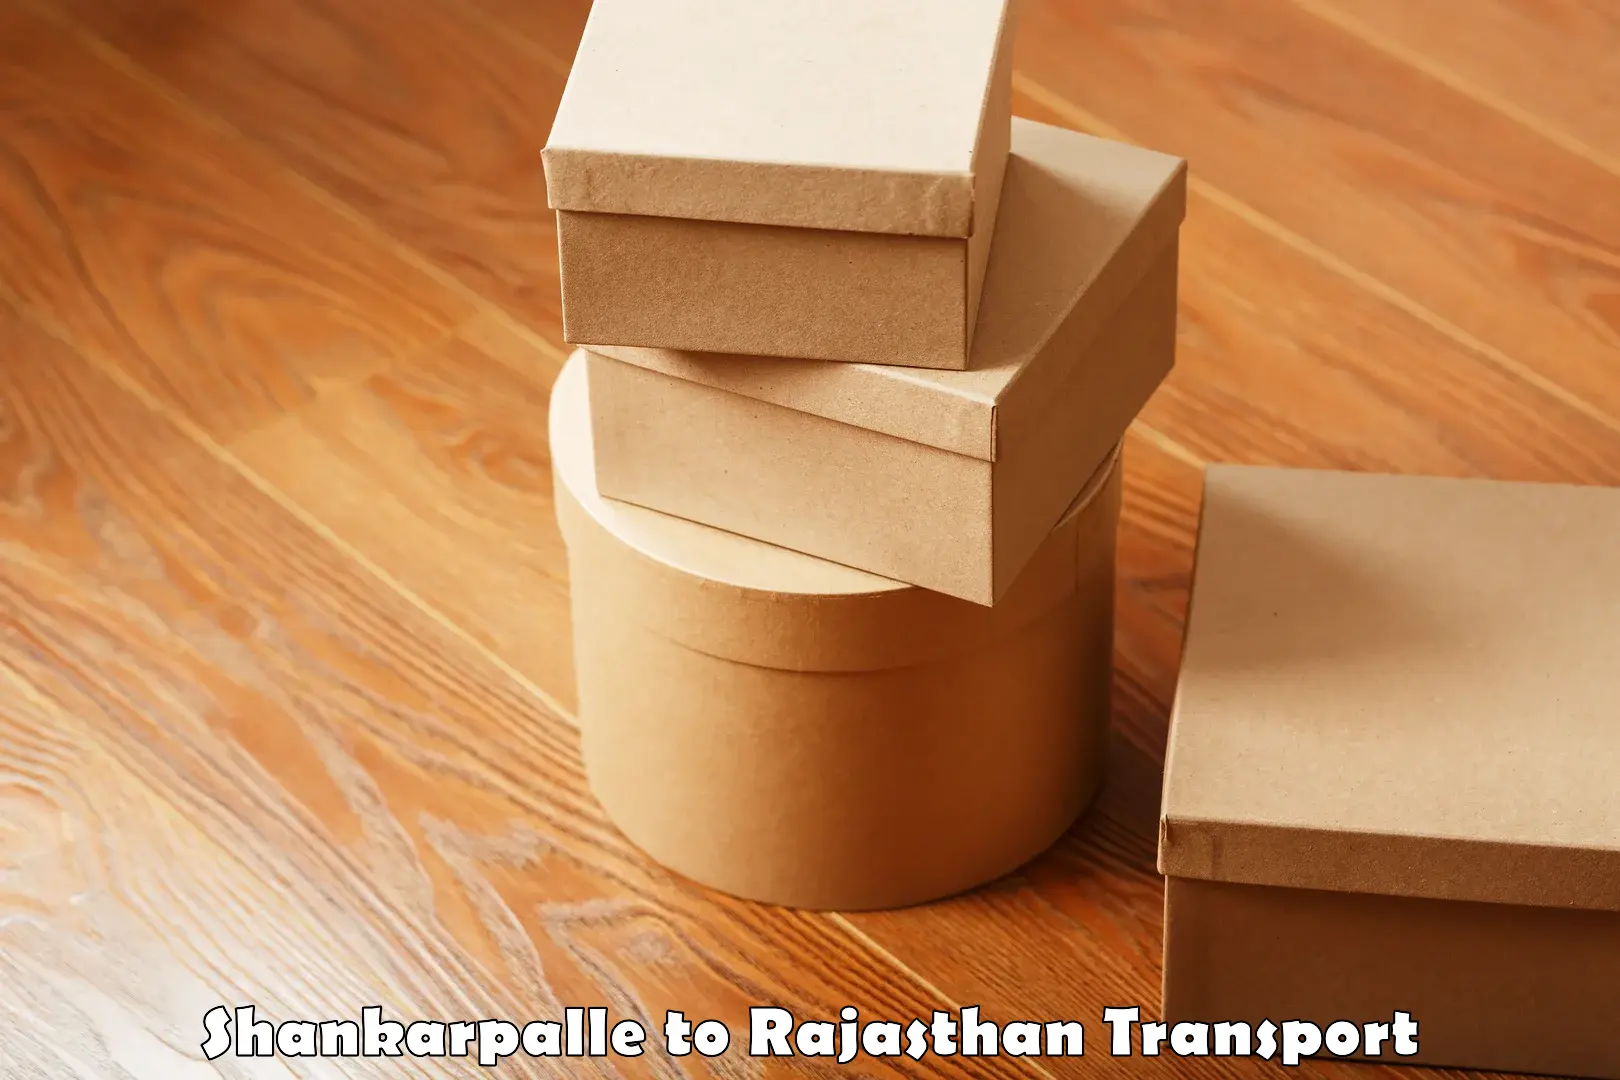 Air freight transport services in Shankarpalle to Jaipur